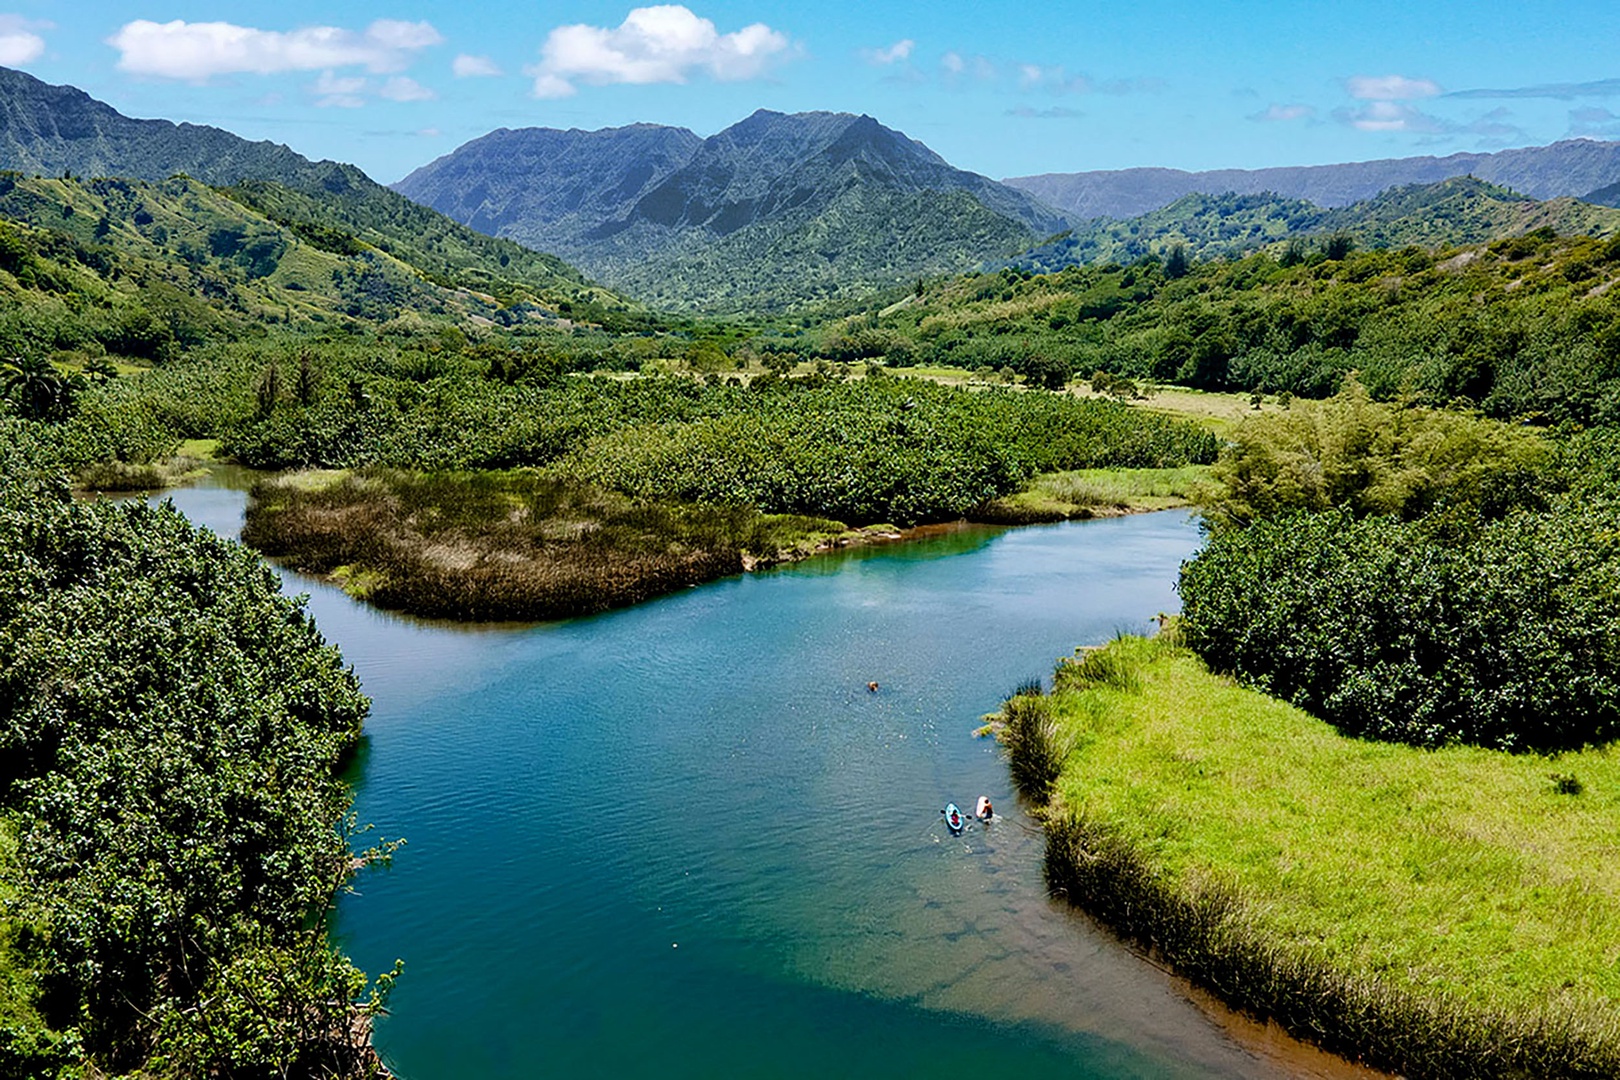 Koloa Vacation Rentals, Pili Mai 7J - Tranquil river meandering through the valley, ideal for kayaking and nature watching.